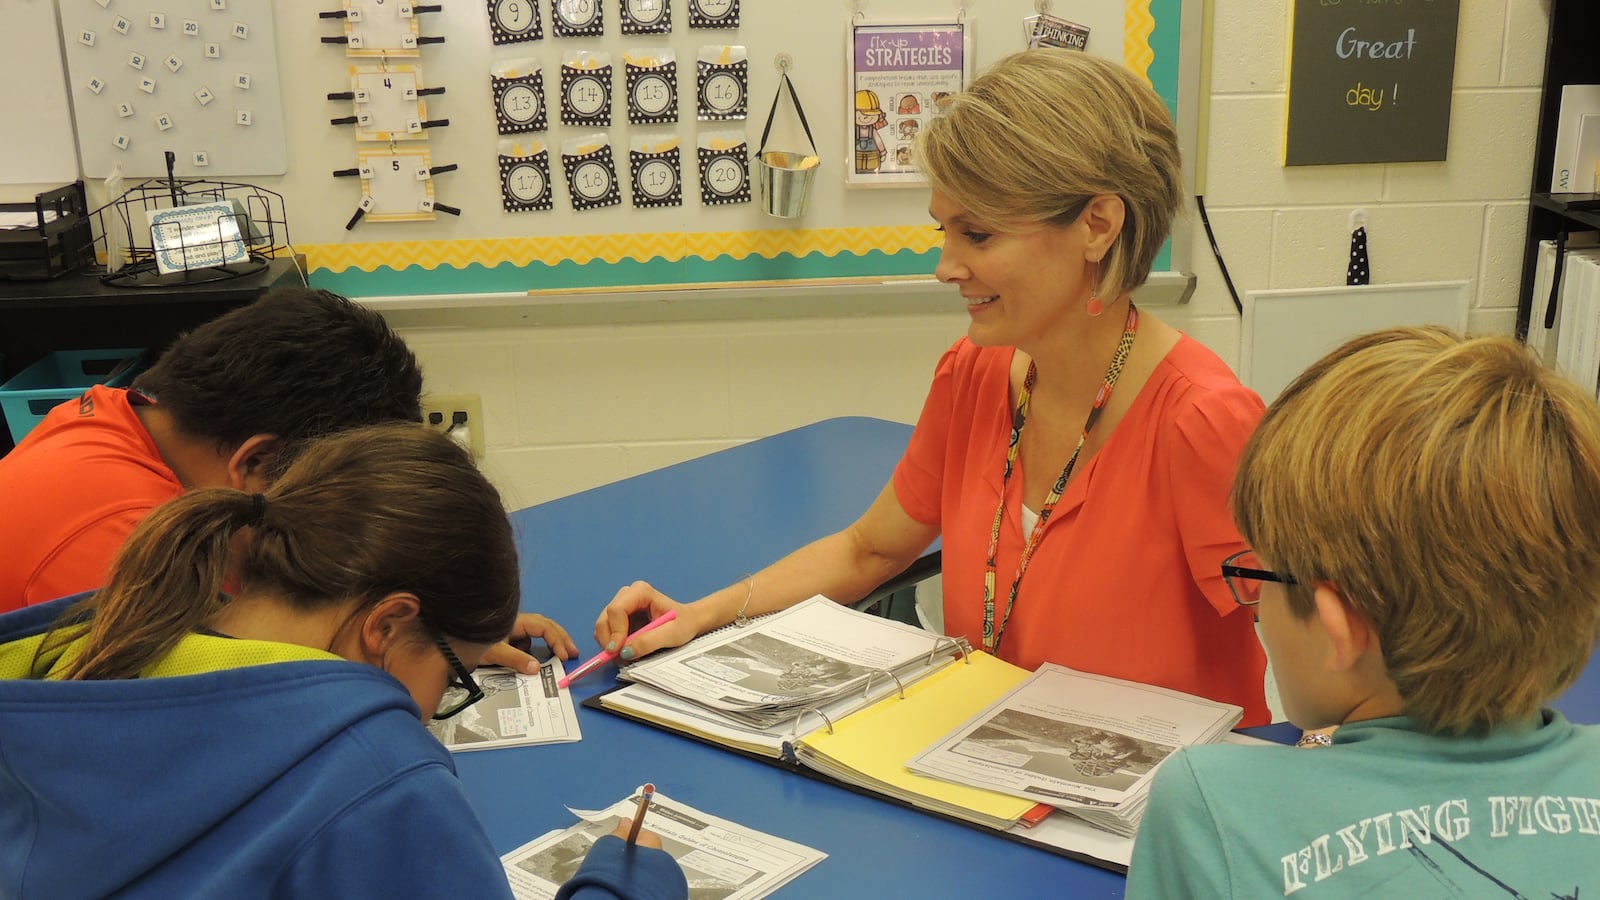 Cathy Whitehead, Tennessee's 2015-16 Teacher of the Year, works with her third-grade students at West Chester Elementary School in Henderson.